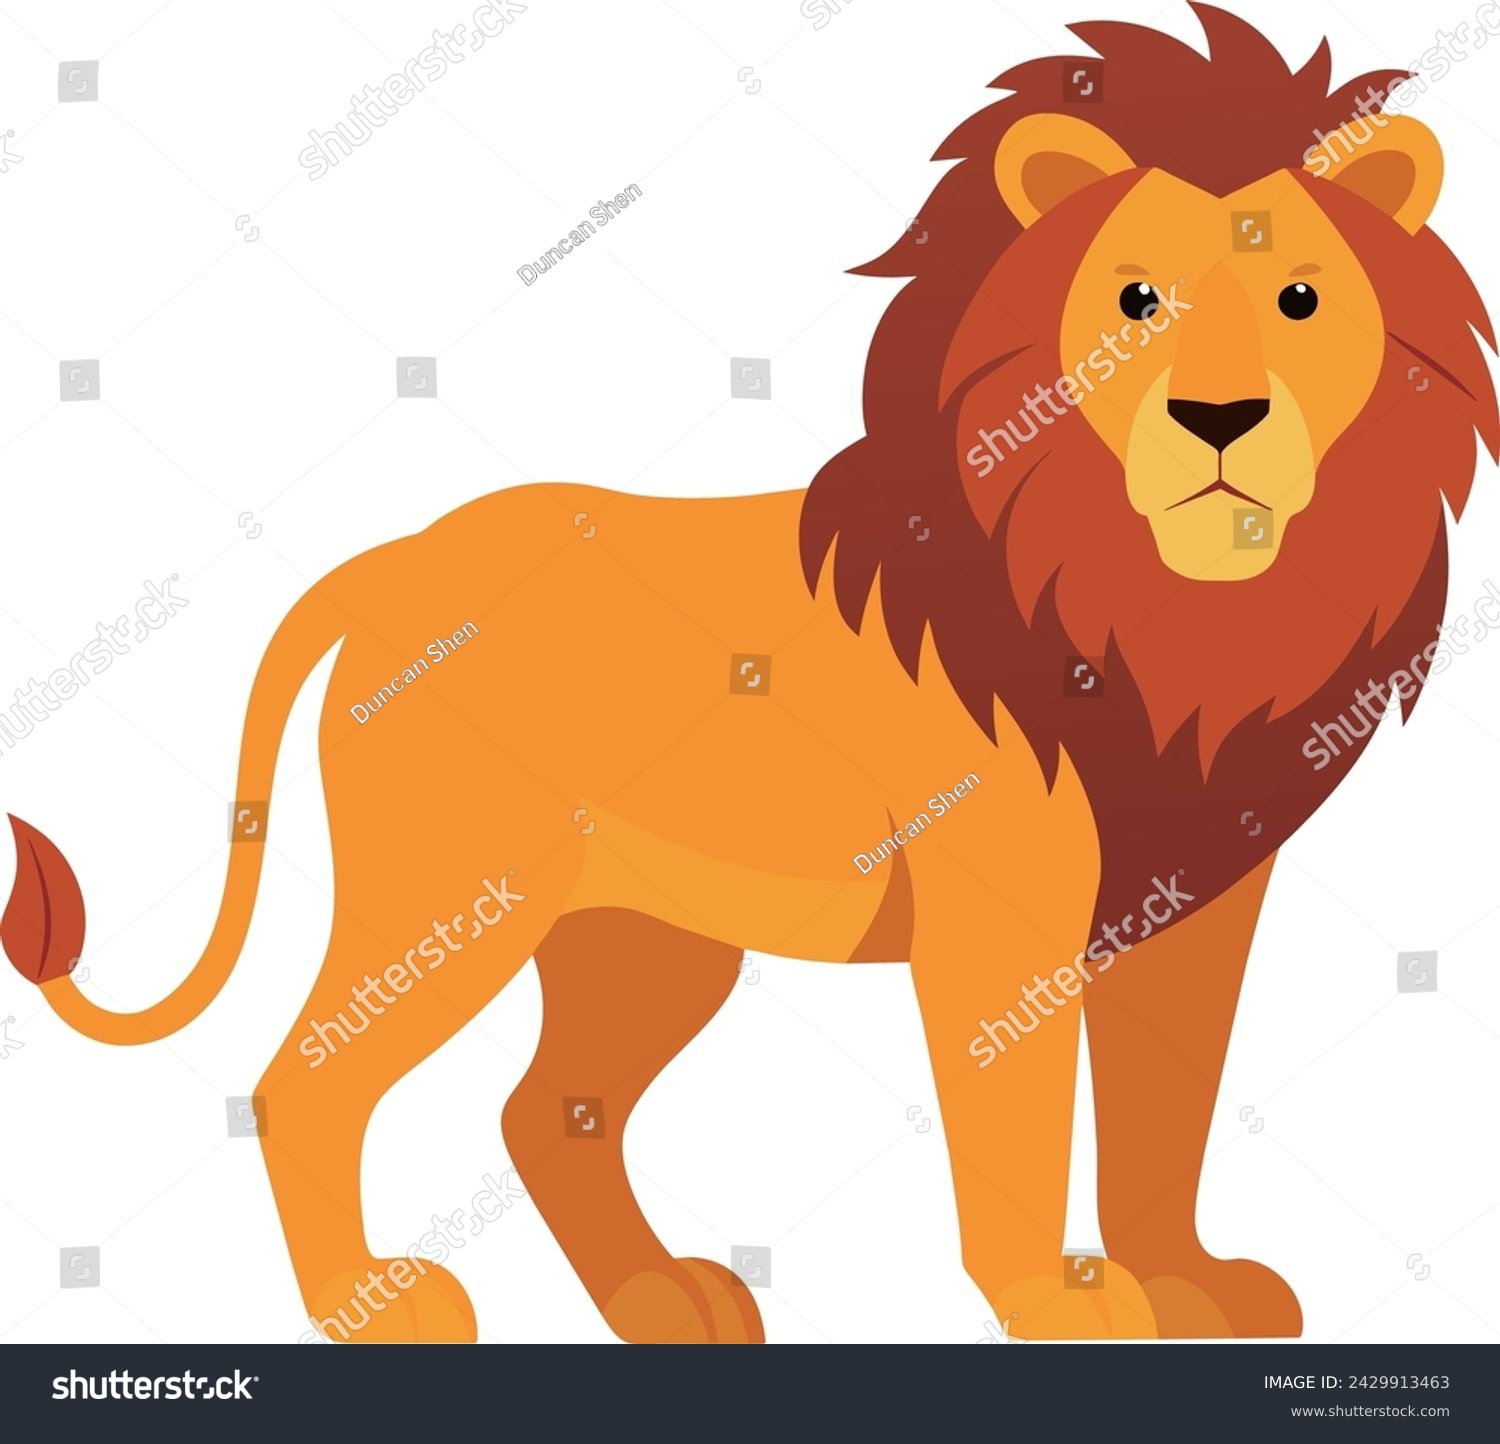 SVG of Illustration of a Lion on a white background in vector style svg